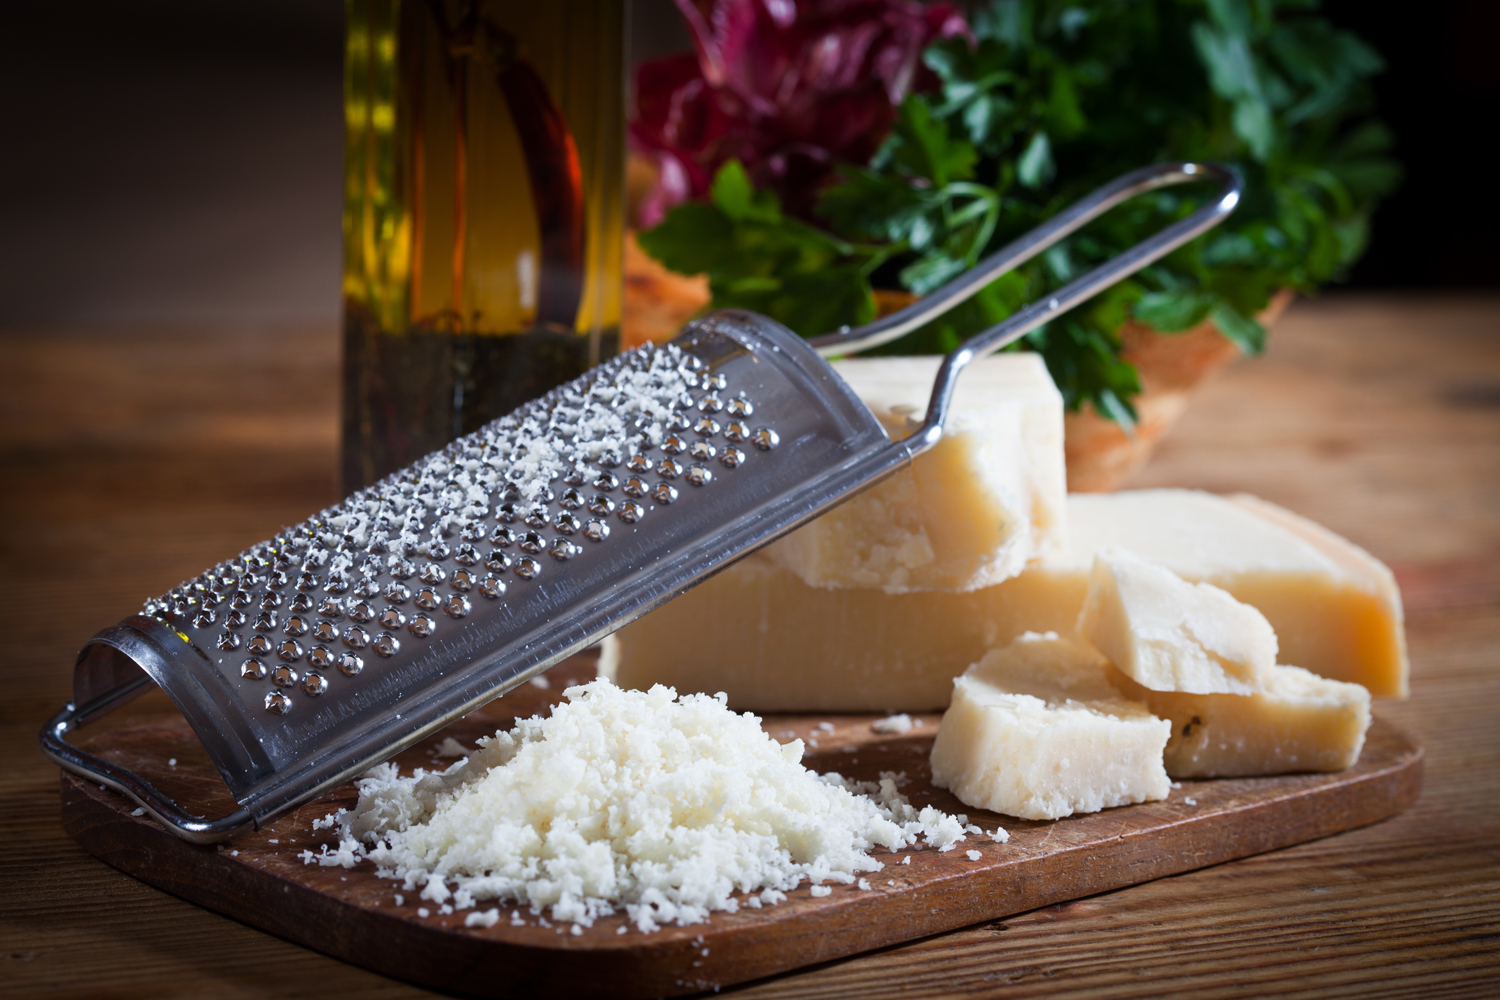 https://www.themanual.com/wp-content/uploads/sites/9/2021/02/best-cheese-graters-2021.jpg?p=1